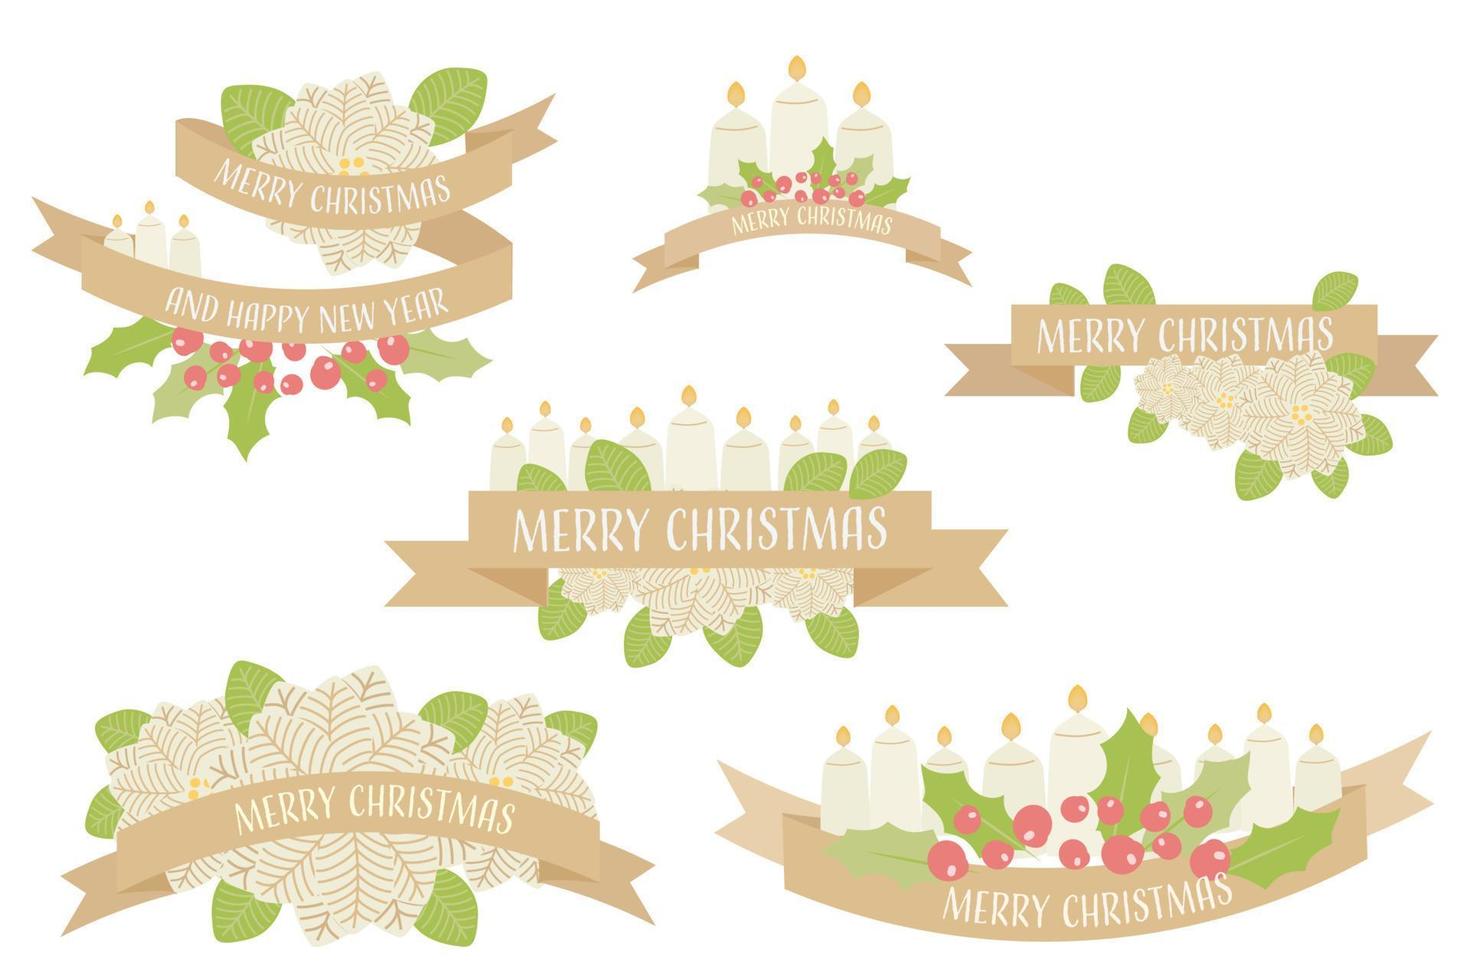 golden Christmas banner flower and candle collection eps10 vector illustration